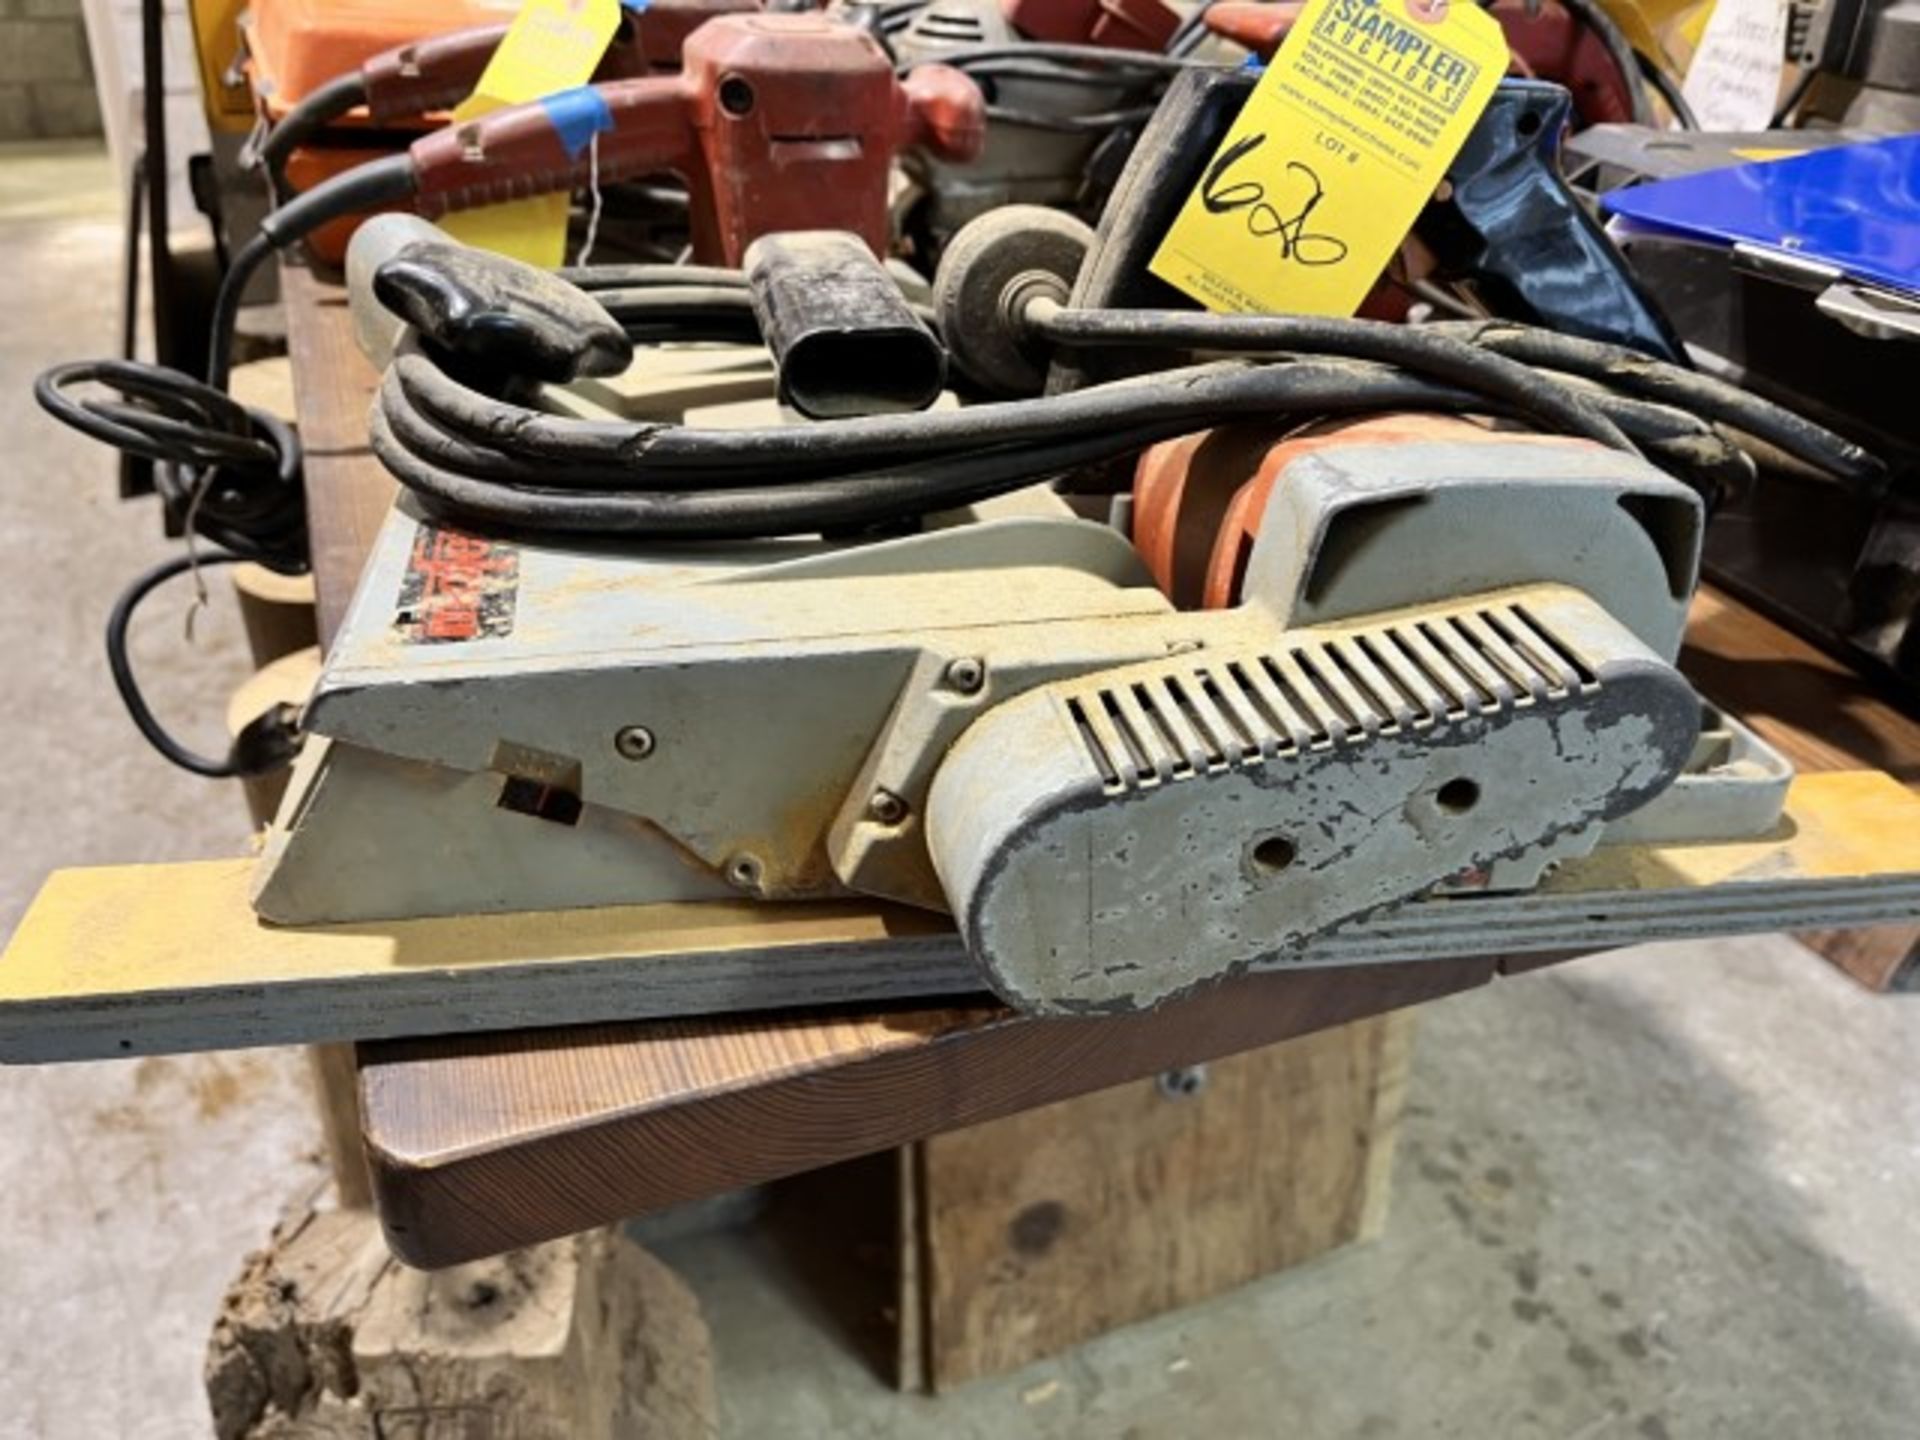 MAFELL ARTICLE #921922 PORTABLE PLANER - 220V / 60 CYCLE - SERIAL No. 124493